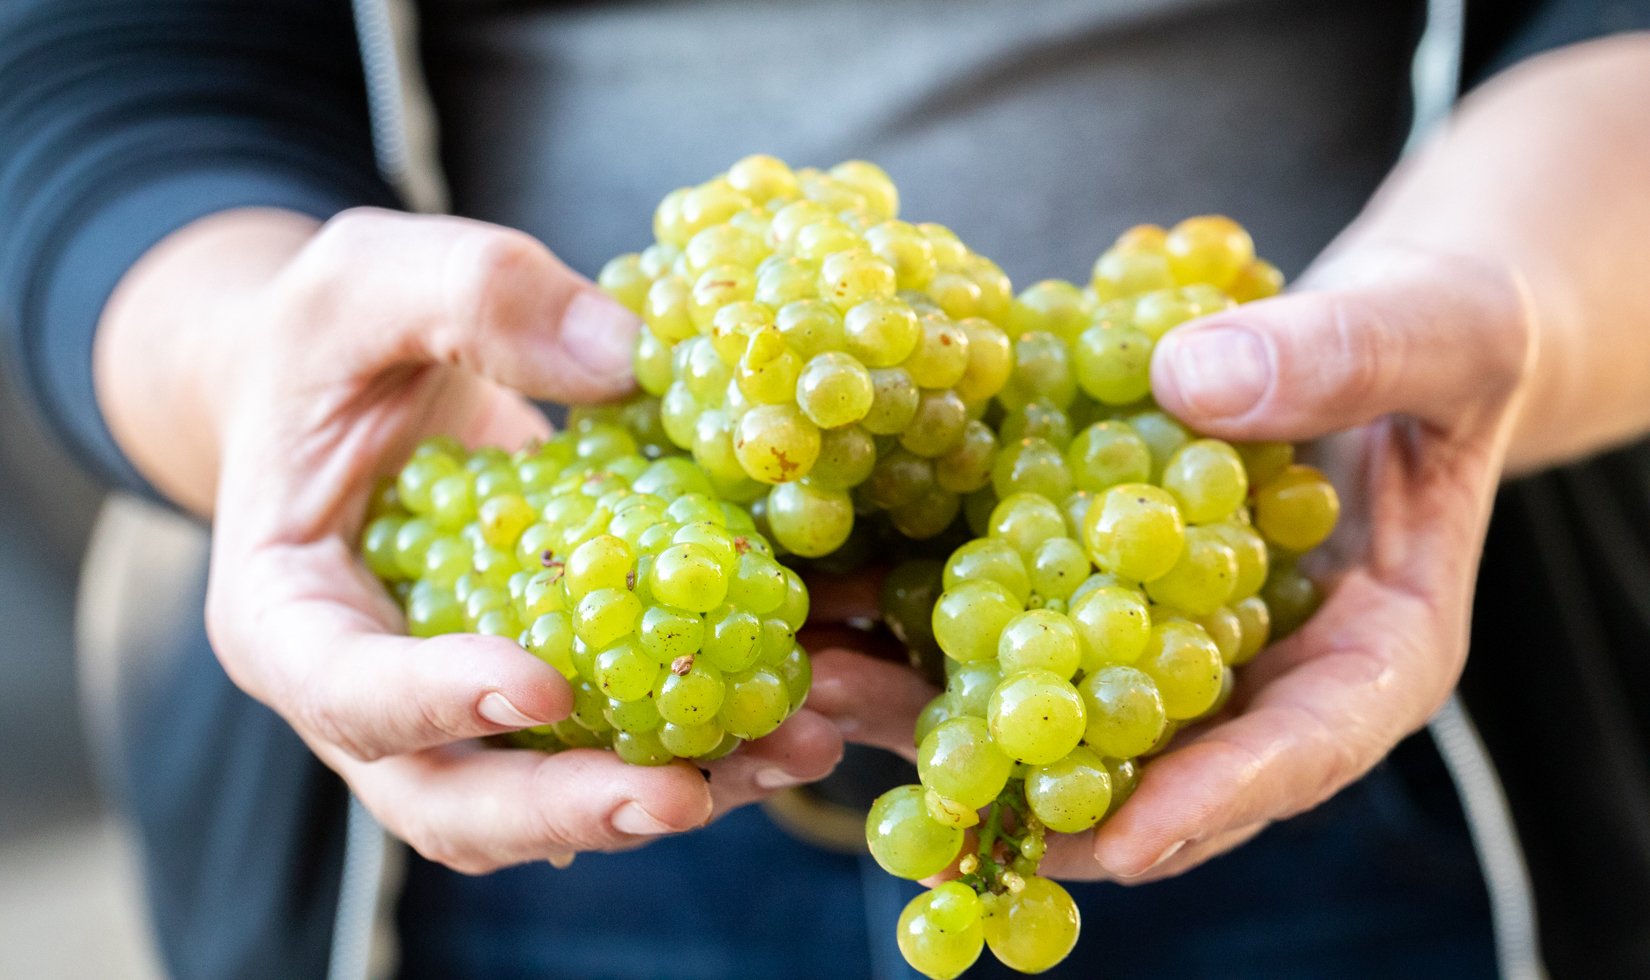 A pair of hands holding out 3 shiny bundles of green chardonnay grapes.